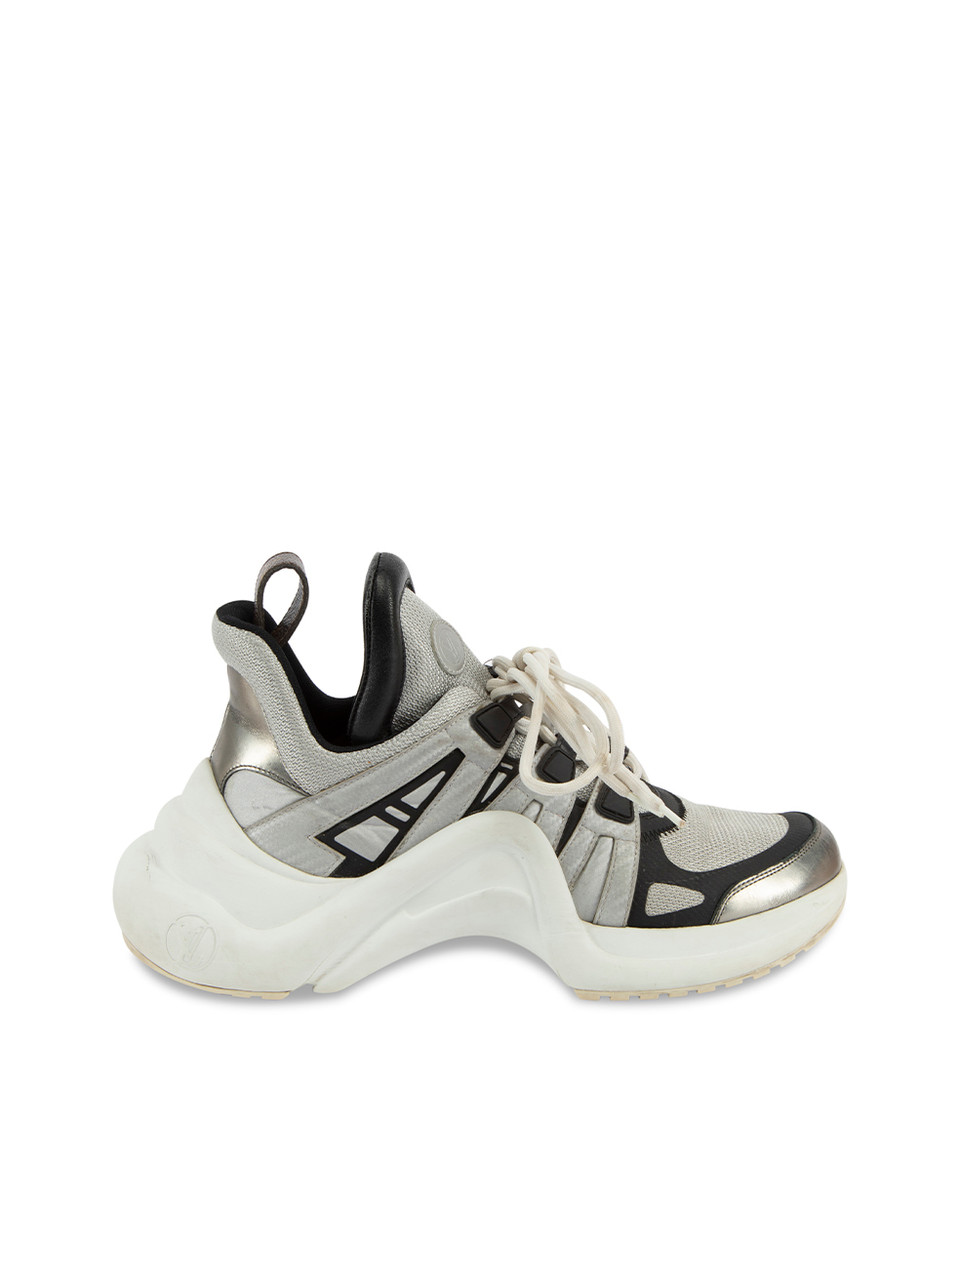 LOUIS VUITTON Sneakers ARCHLIGHT TRAINERS Size 42 White Black Silver